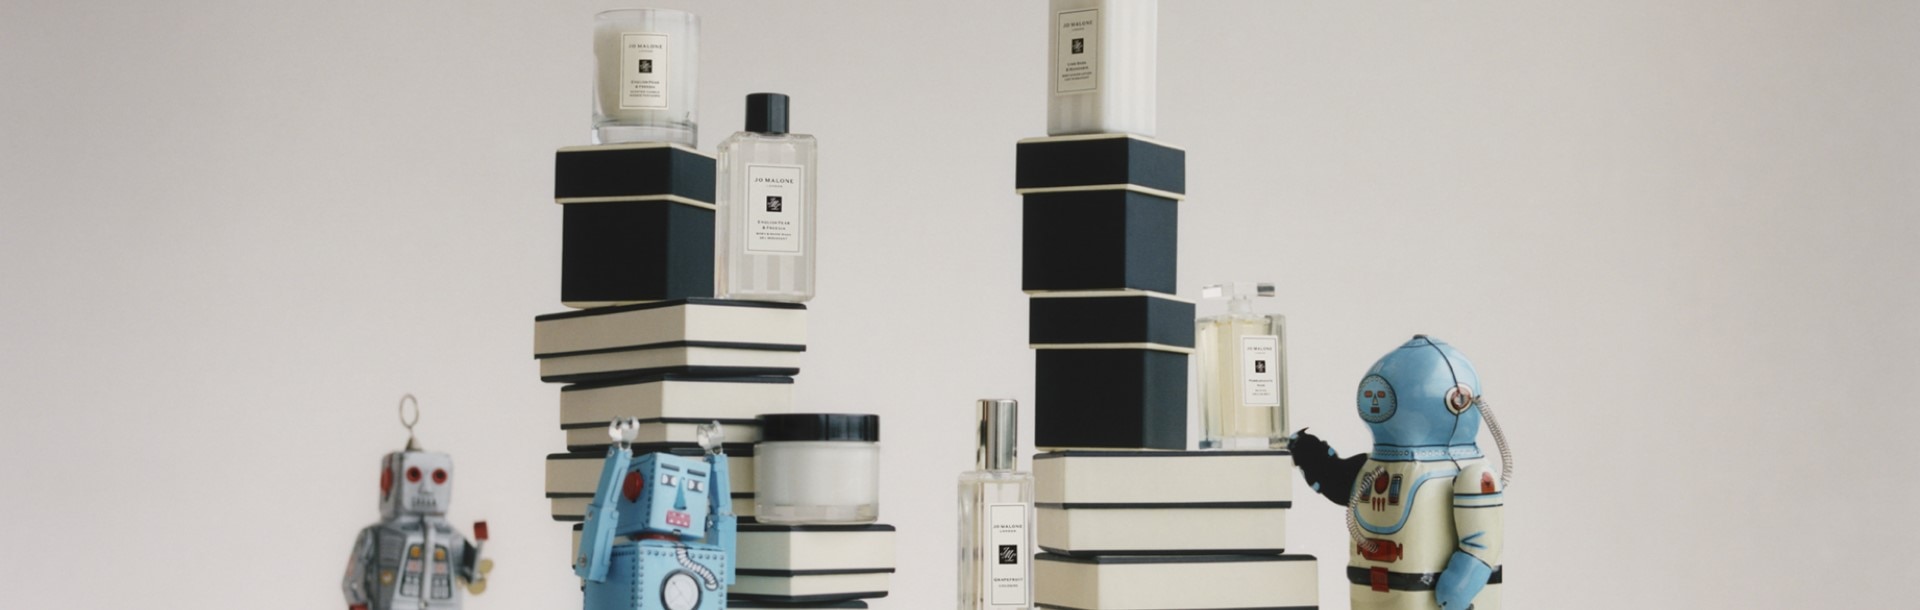 stack of jo malone london cream and black boxes deluxe samples. 9ml colognes, 15ml Body Washes & Body cremes.